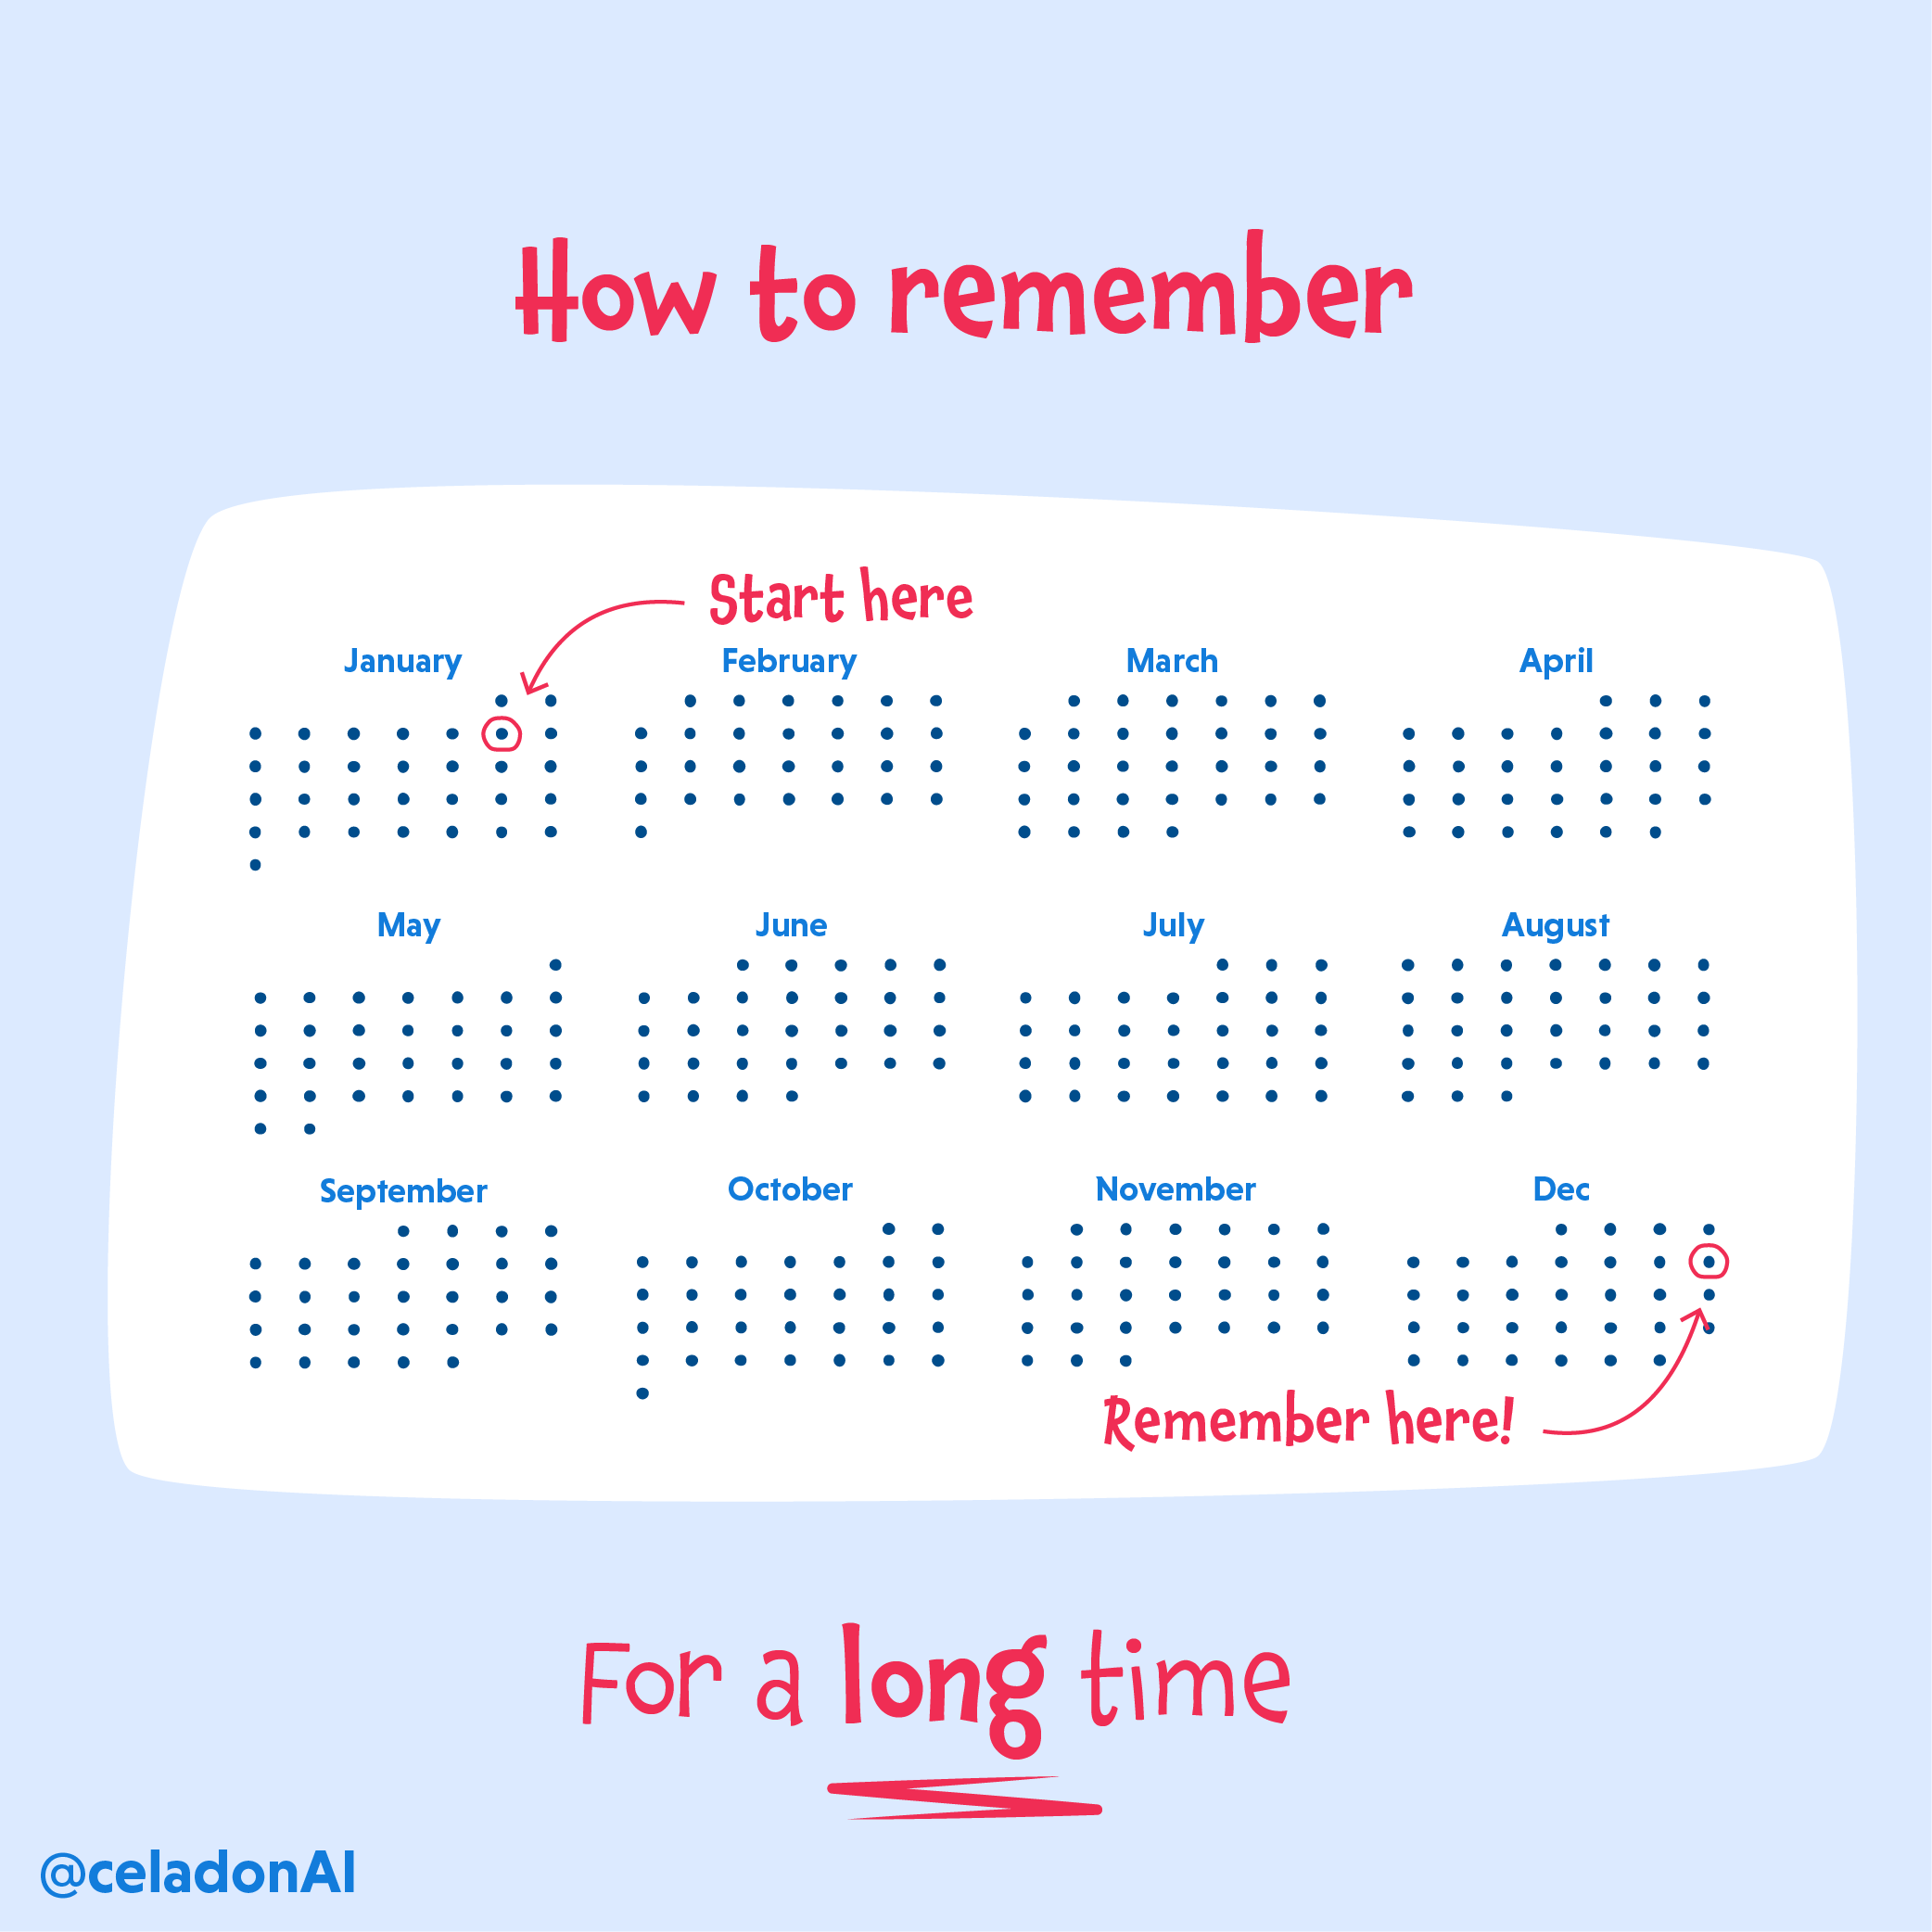 How to remember for a long time